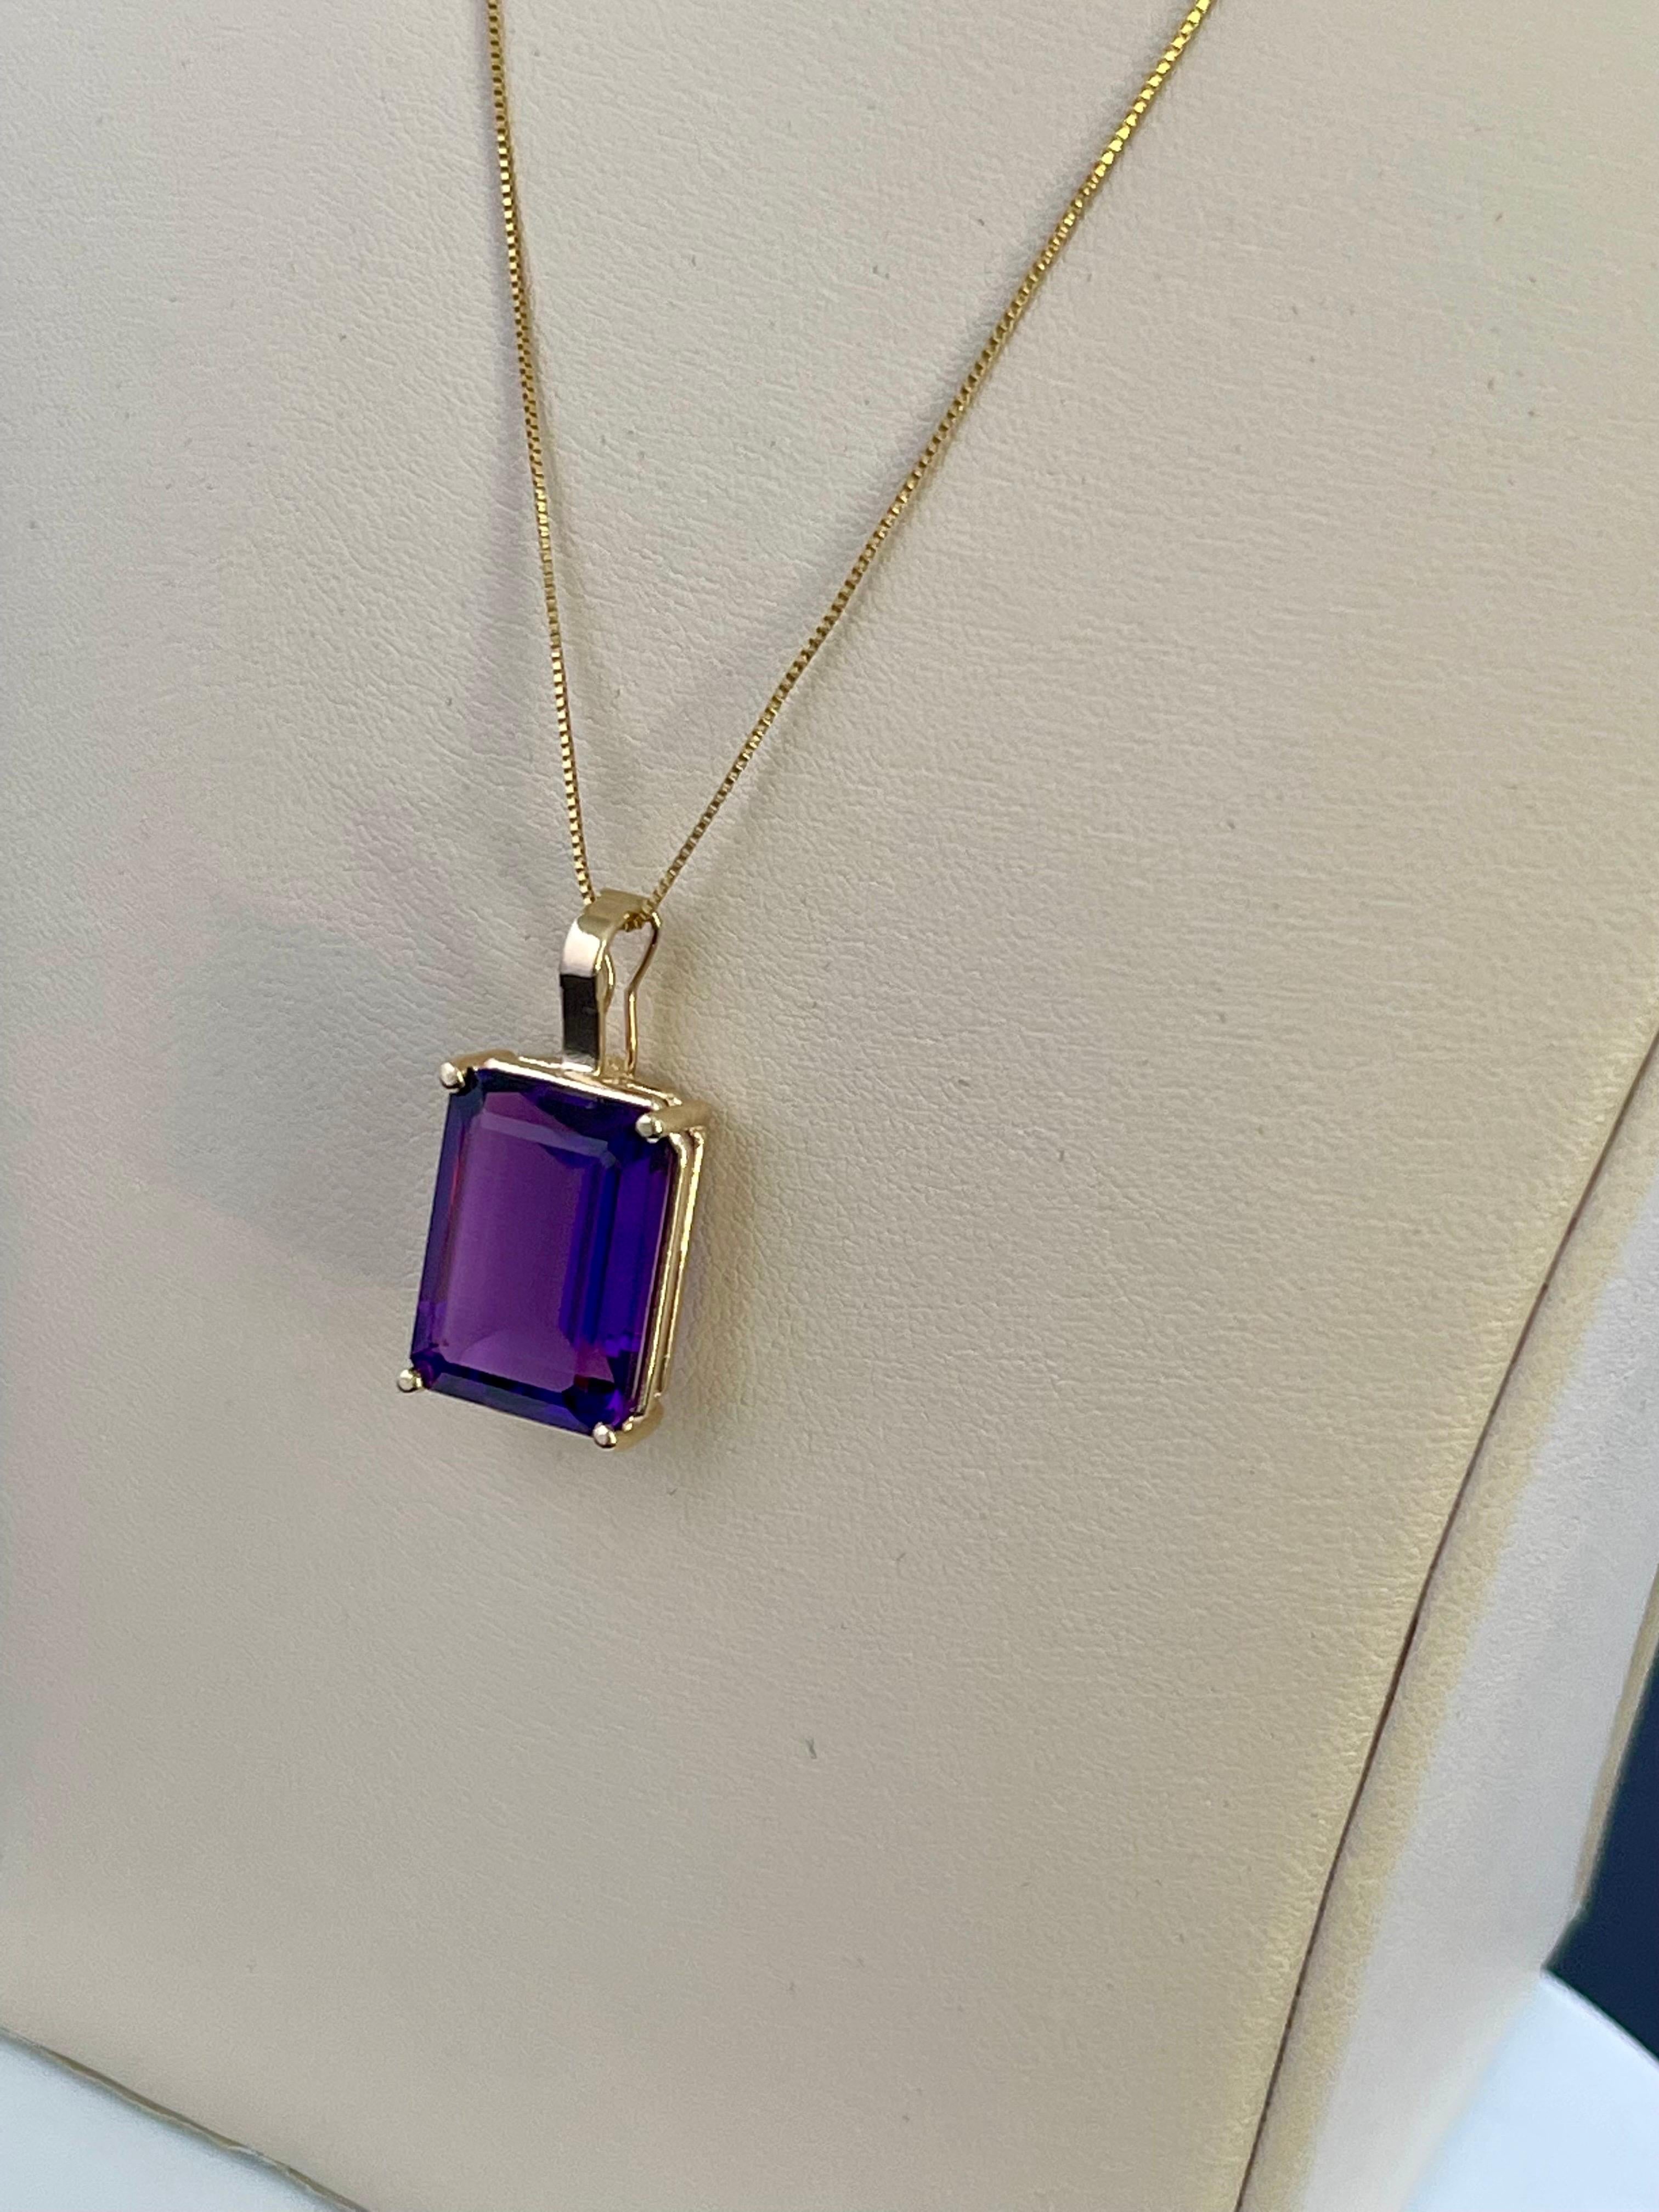 12 Ct Emerald Cut Amethyst Pendant /Necklace + 14 Kt Yellow Gold Chain Vintage In Excellent Condition For Sale In New York, NY